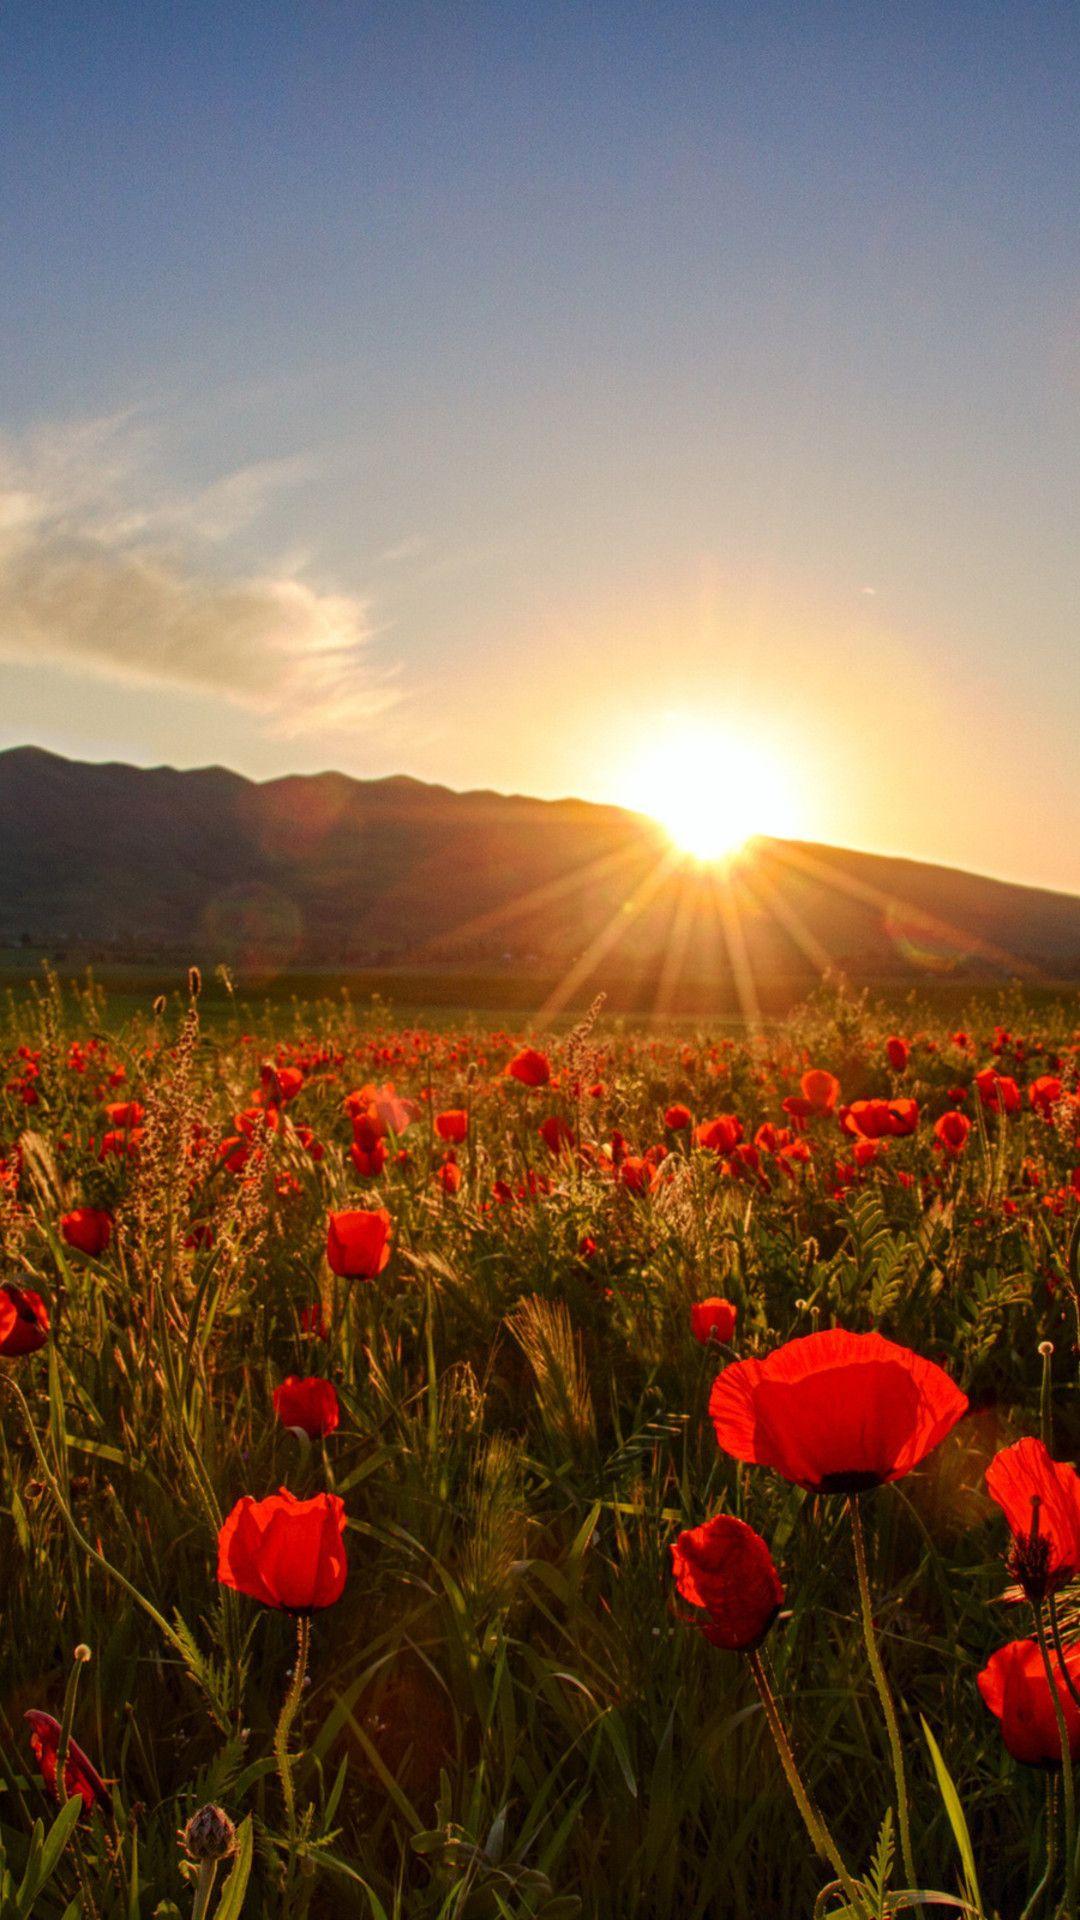 Wallpaper Download 1080x1920 Sunset, field with poppies and hills